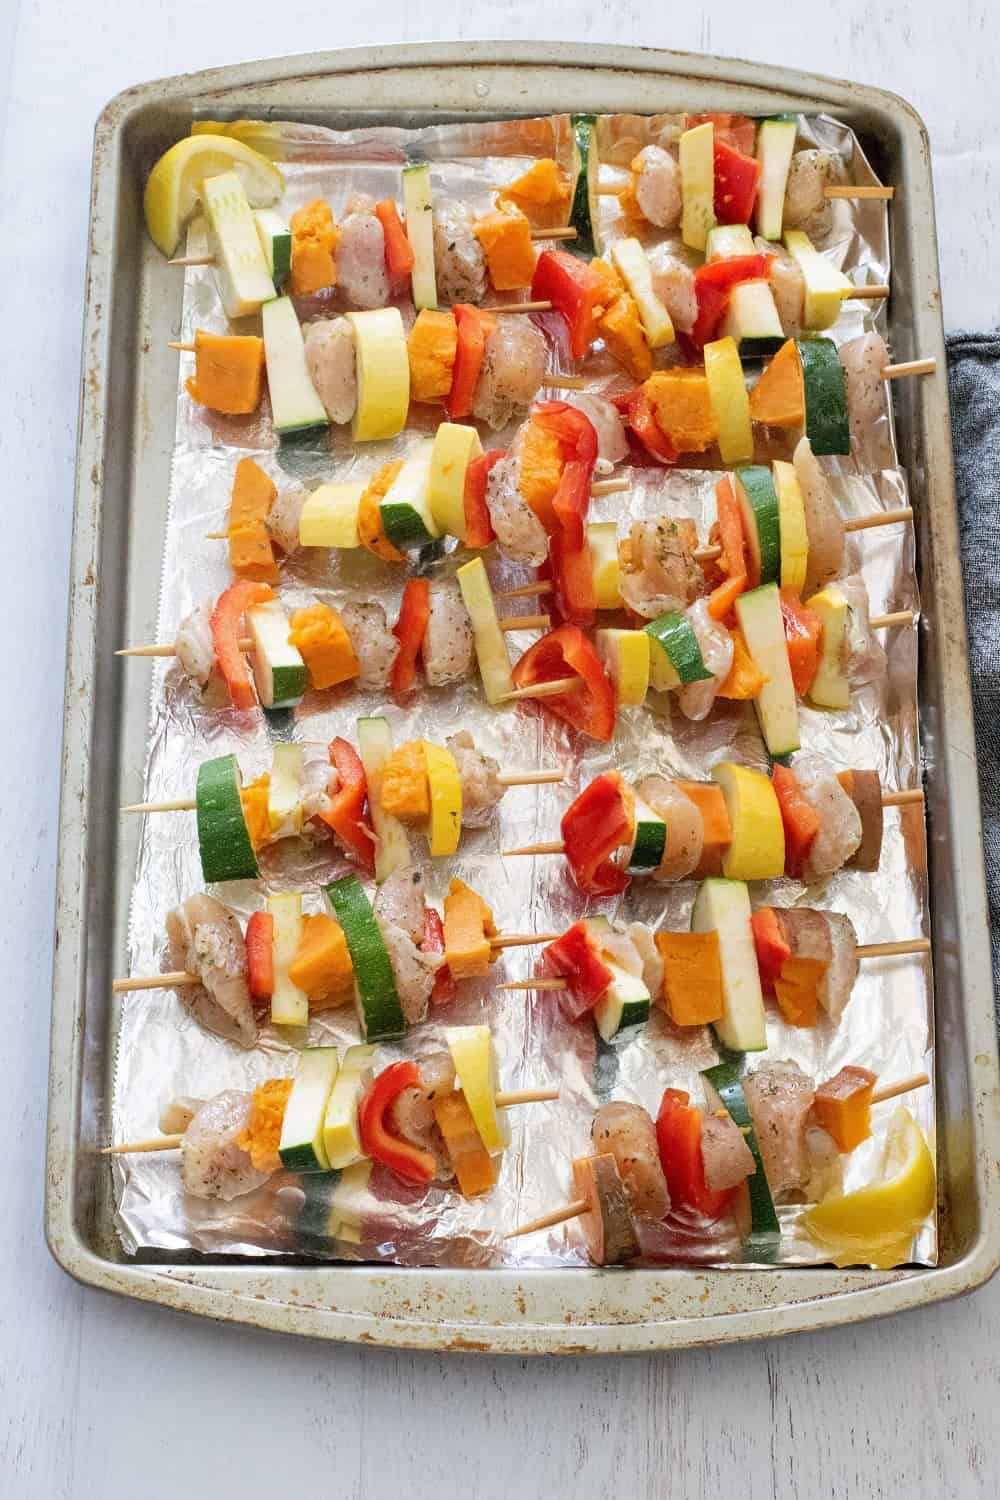 Raw chicken and veggies on skewers before making chicken kabob recipe in oven